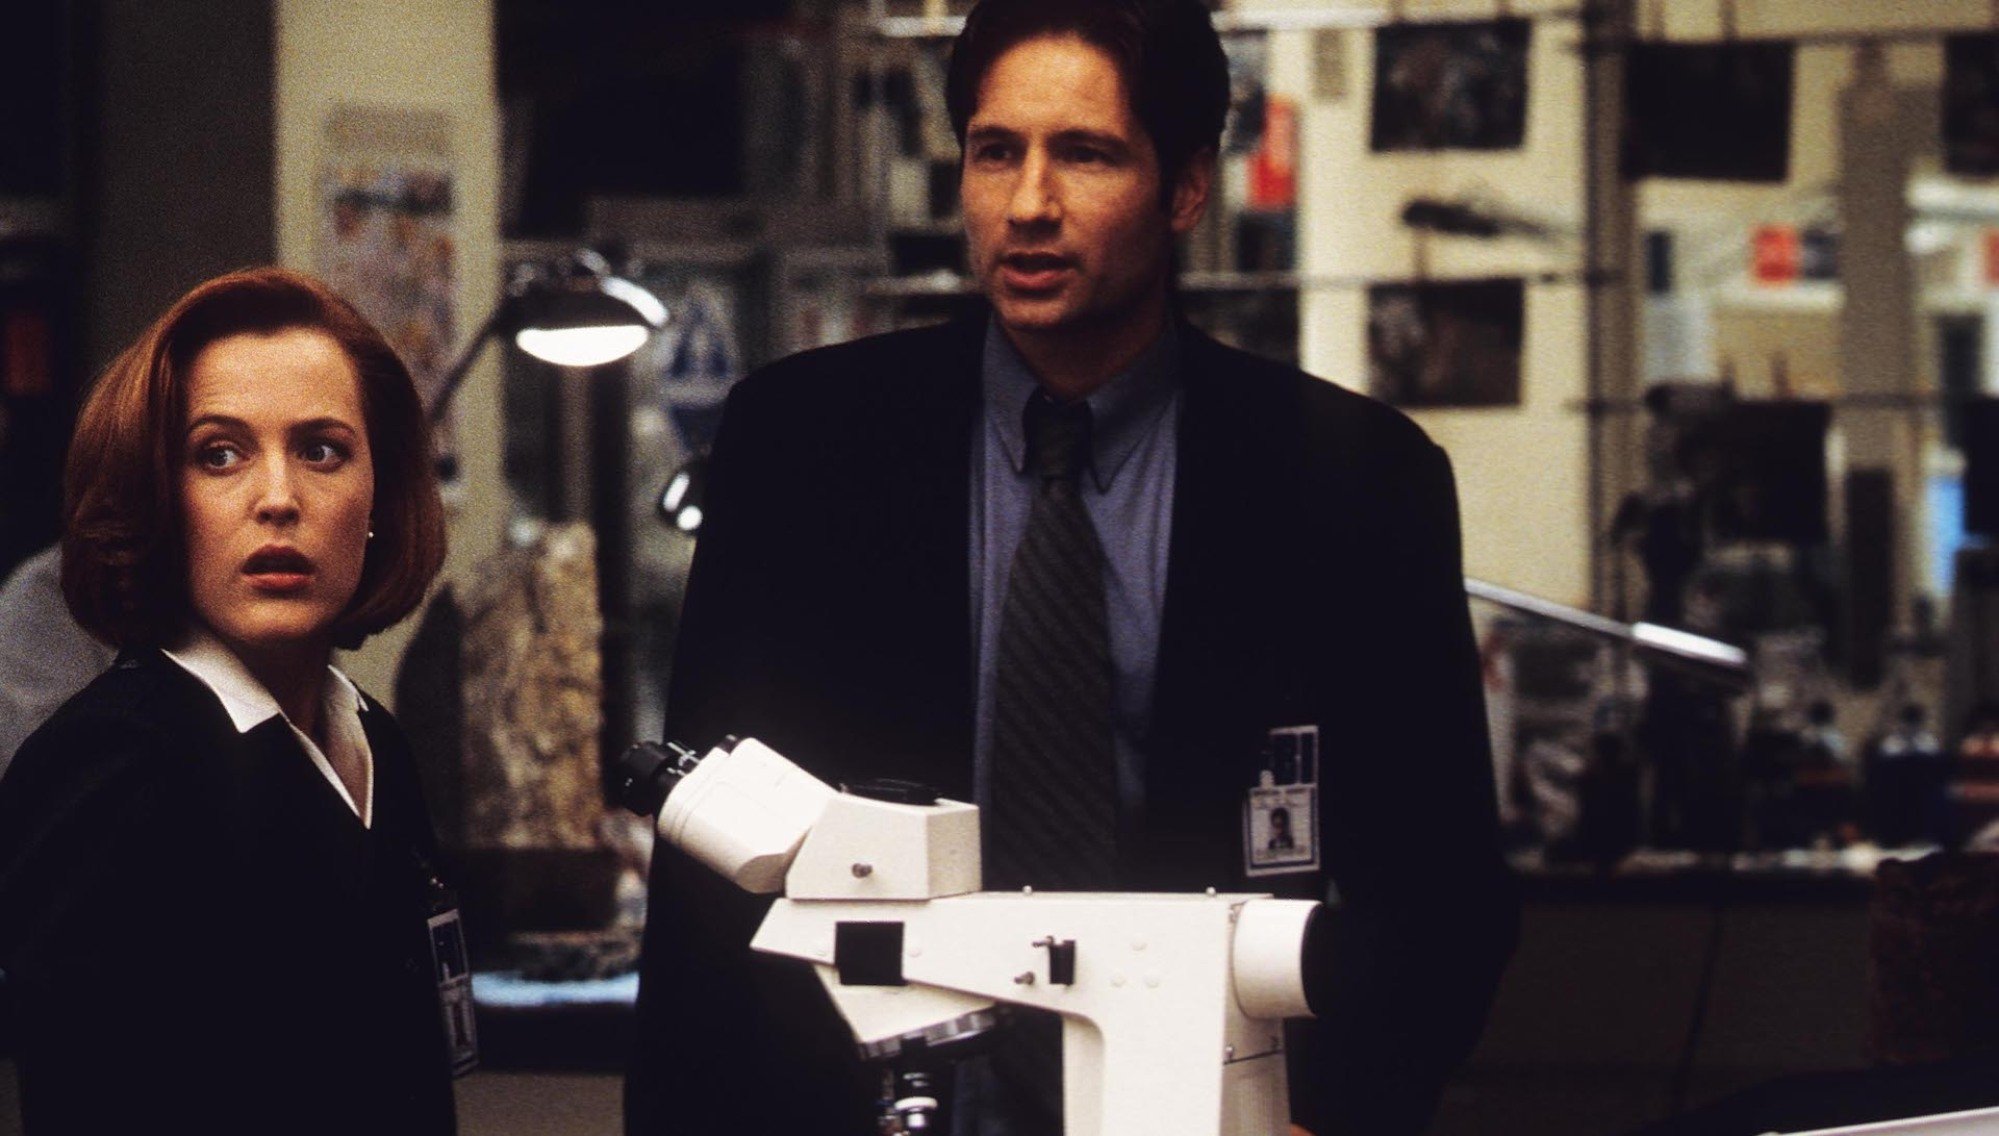 Agent Dana Scully (Gillian Anderson) and Agent Fox Mulder (David Duchovny) stand in a lab in "The X-Files."